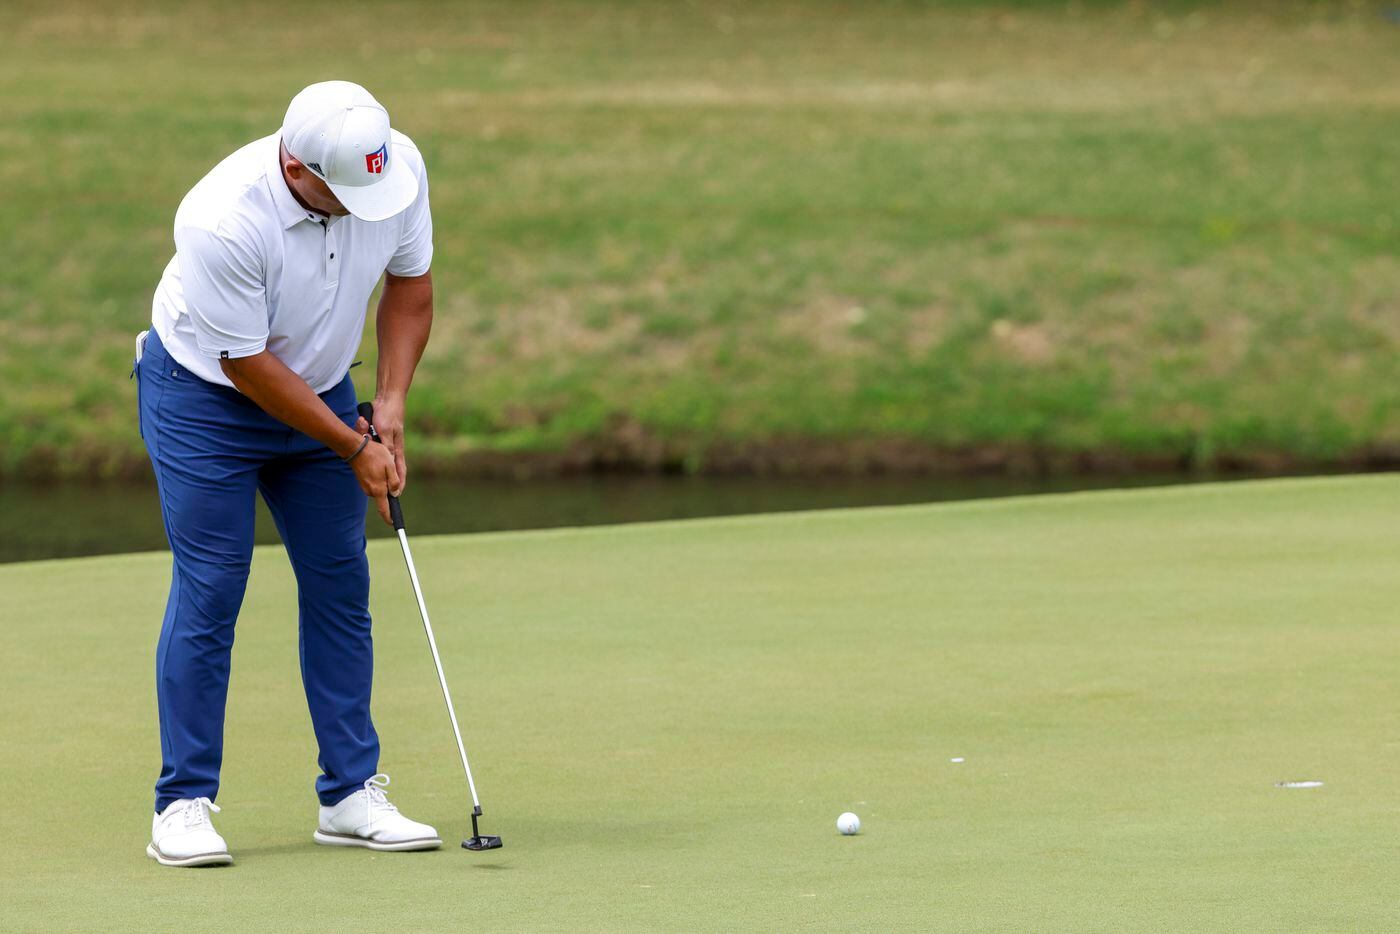 MLB Hall of Fame catcher Ivan "Pudge" Rodriguez putts for a birdie on the 17th green during...